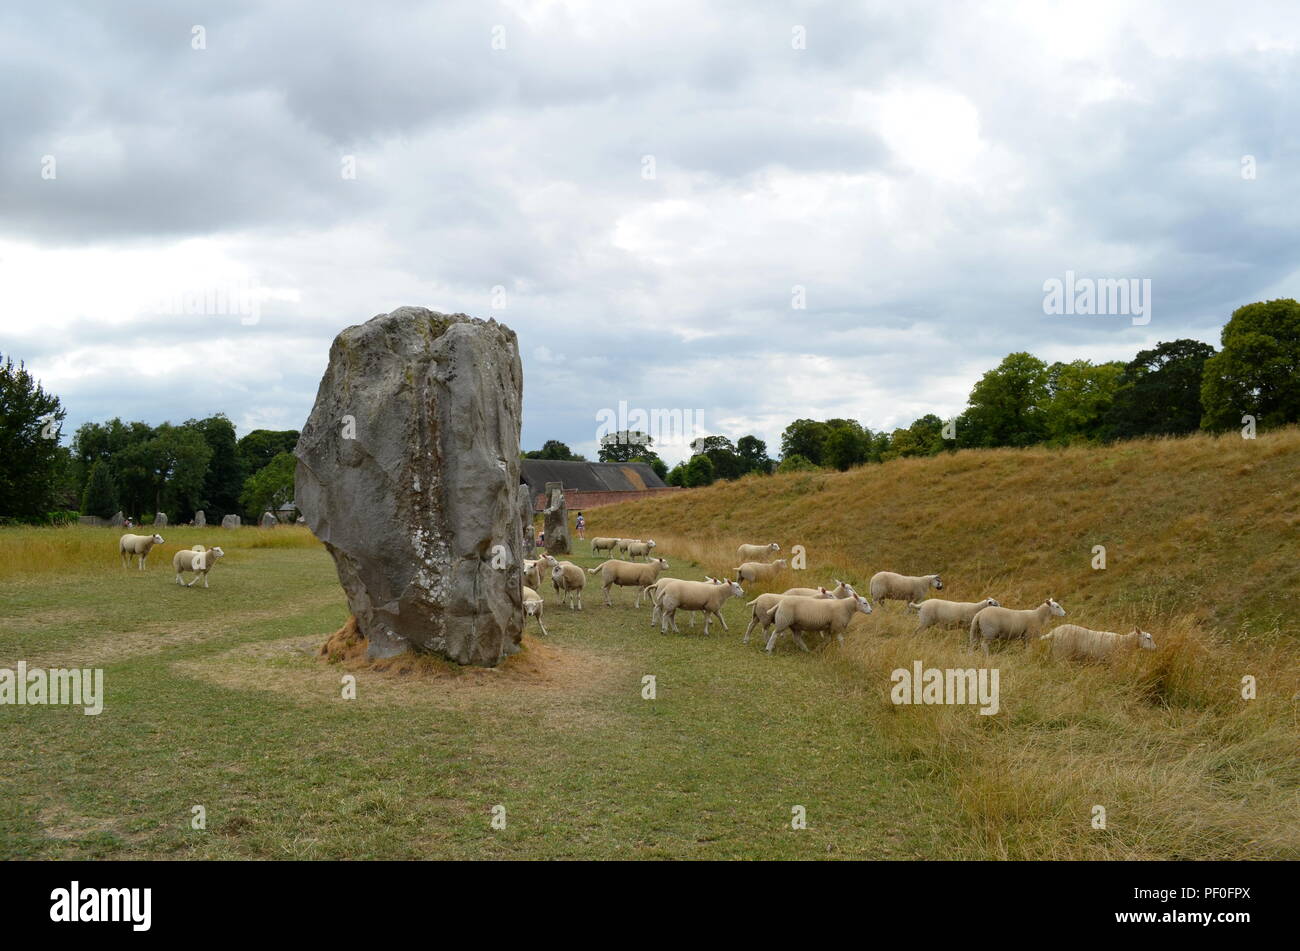 Sheep graze at Avebury, a monument containing three stone circles, around the village of Avebury in Wiltshire, in southwest England. Stock Photo